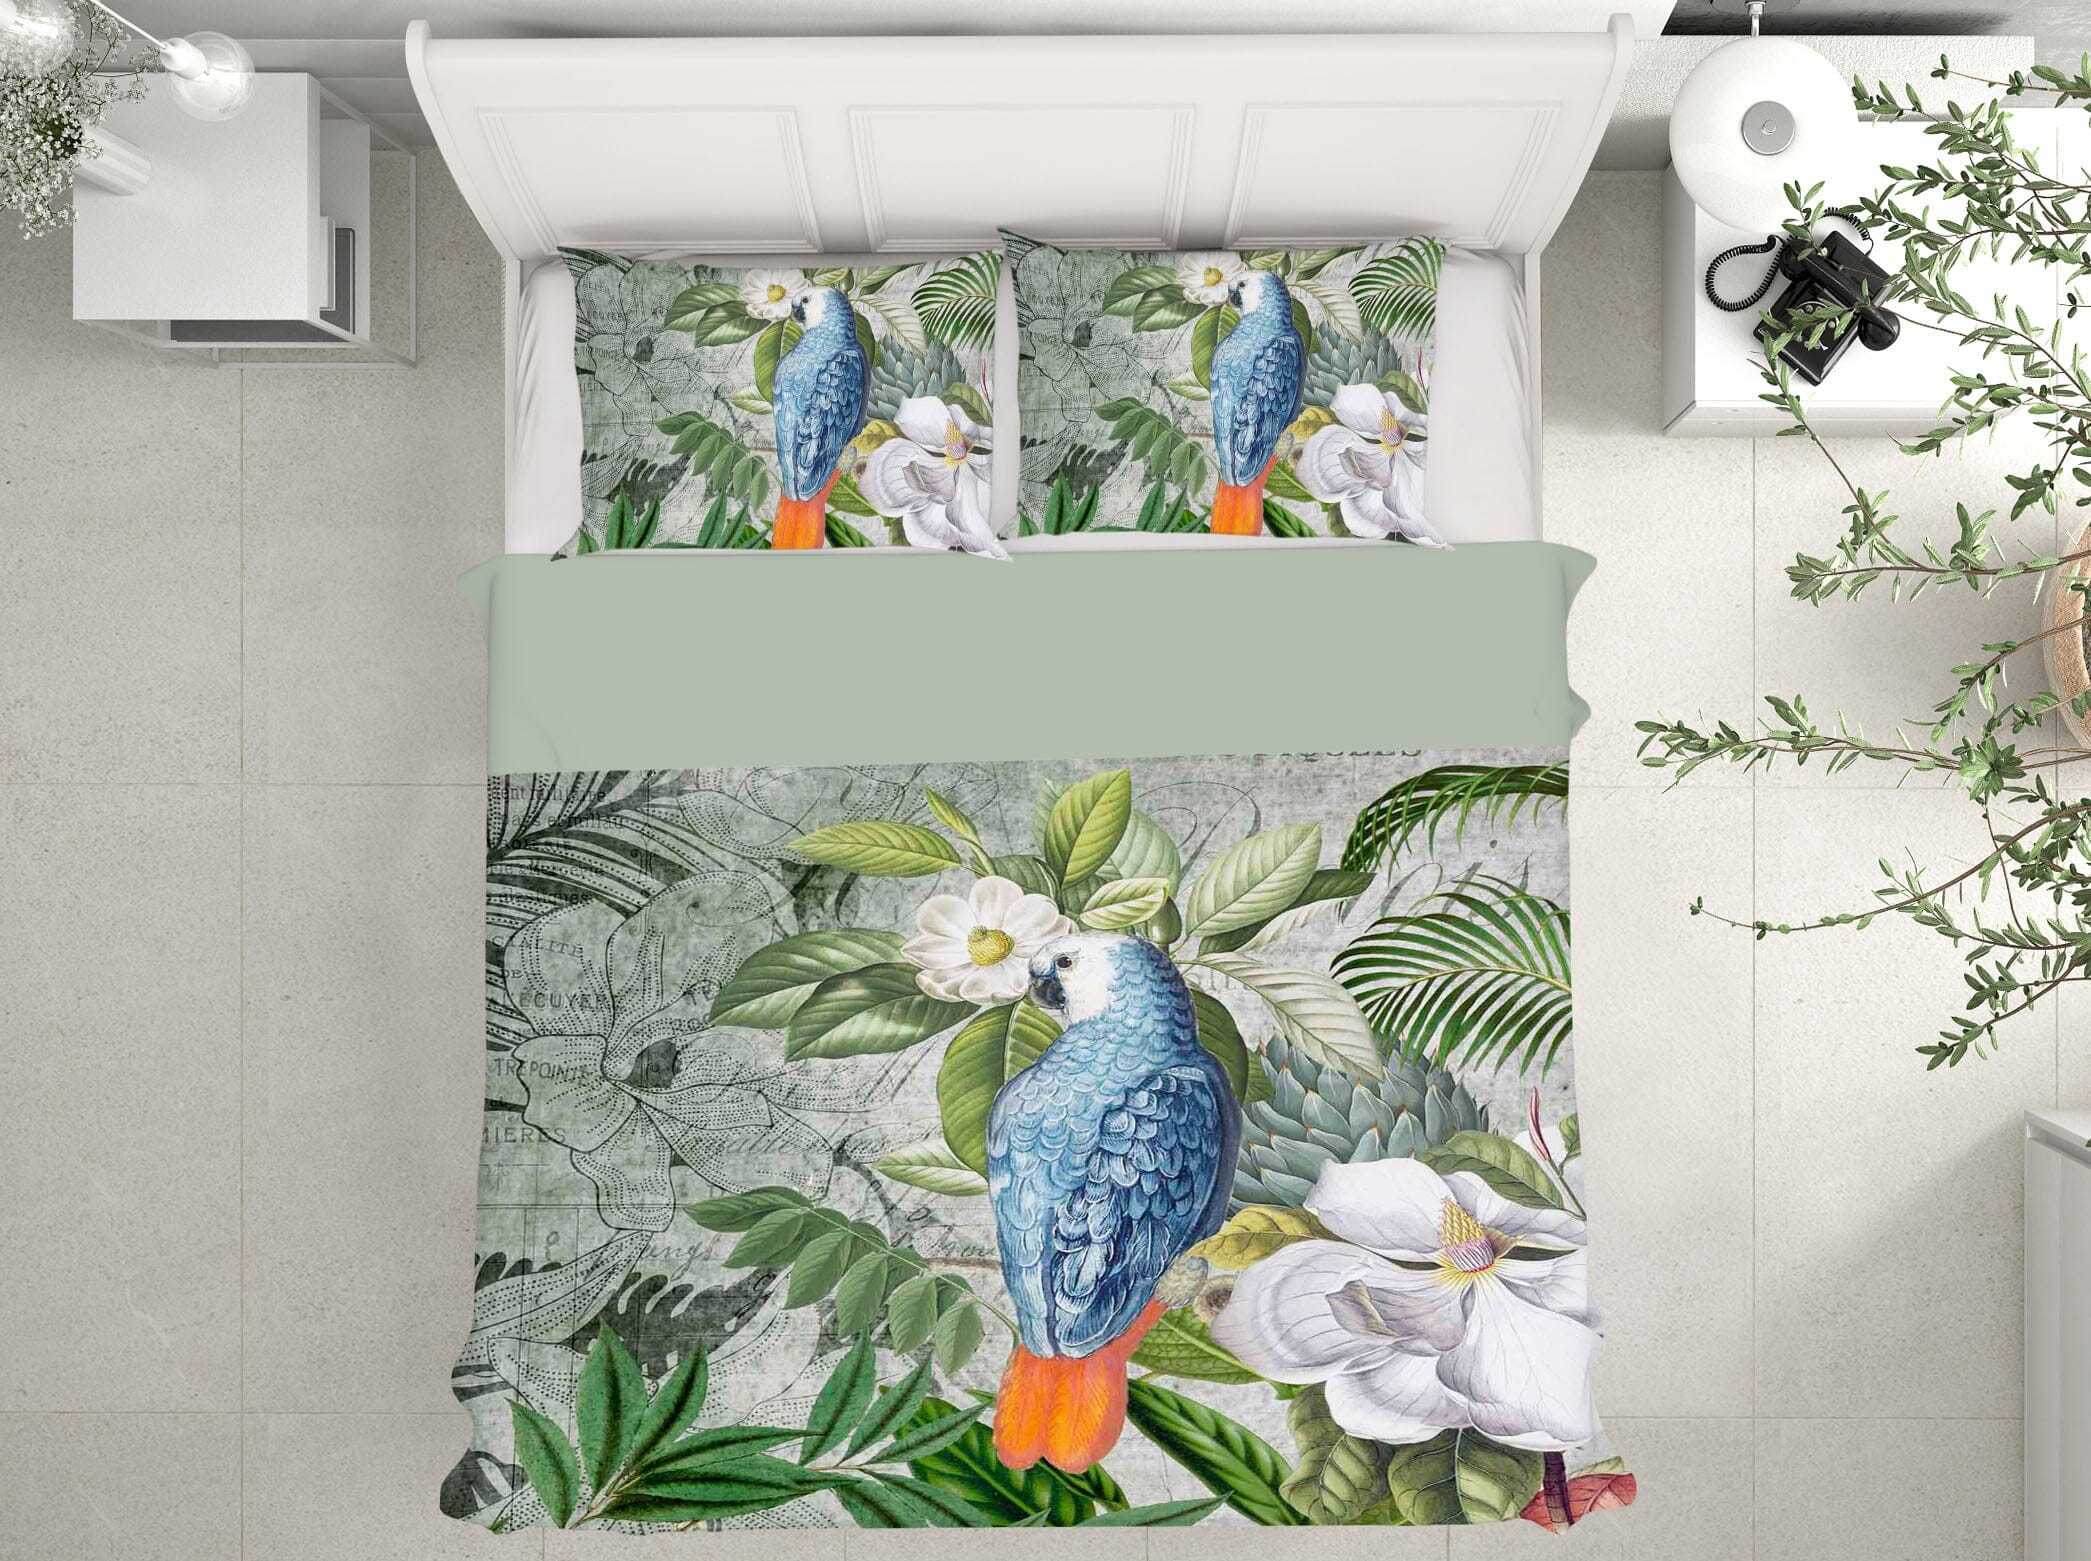 3D Kingdom Of Birds 2134 Andrea haase Bedding Bed Pillowcases Quilt Quiet Covers AJ Creativity Home 